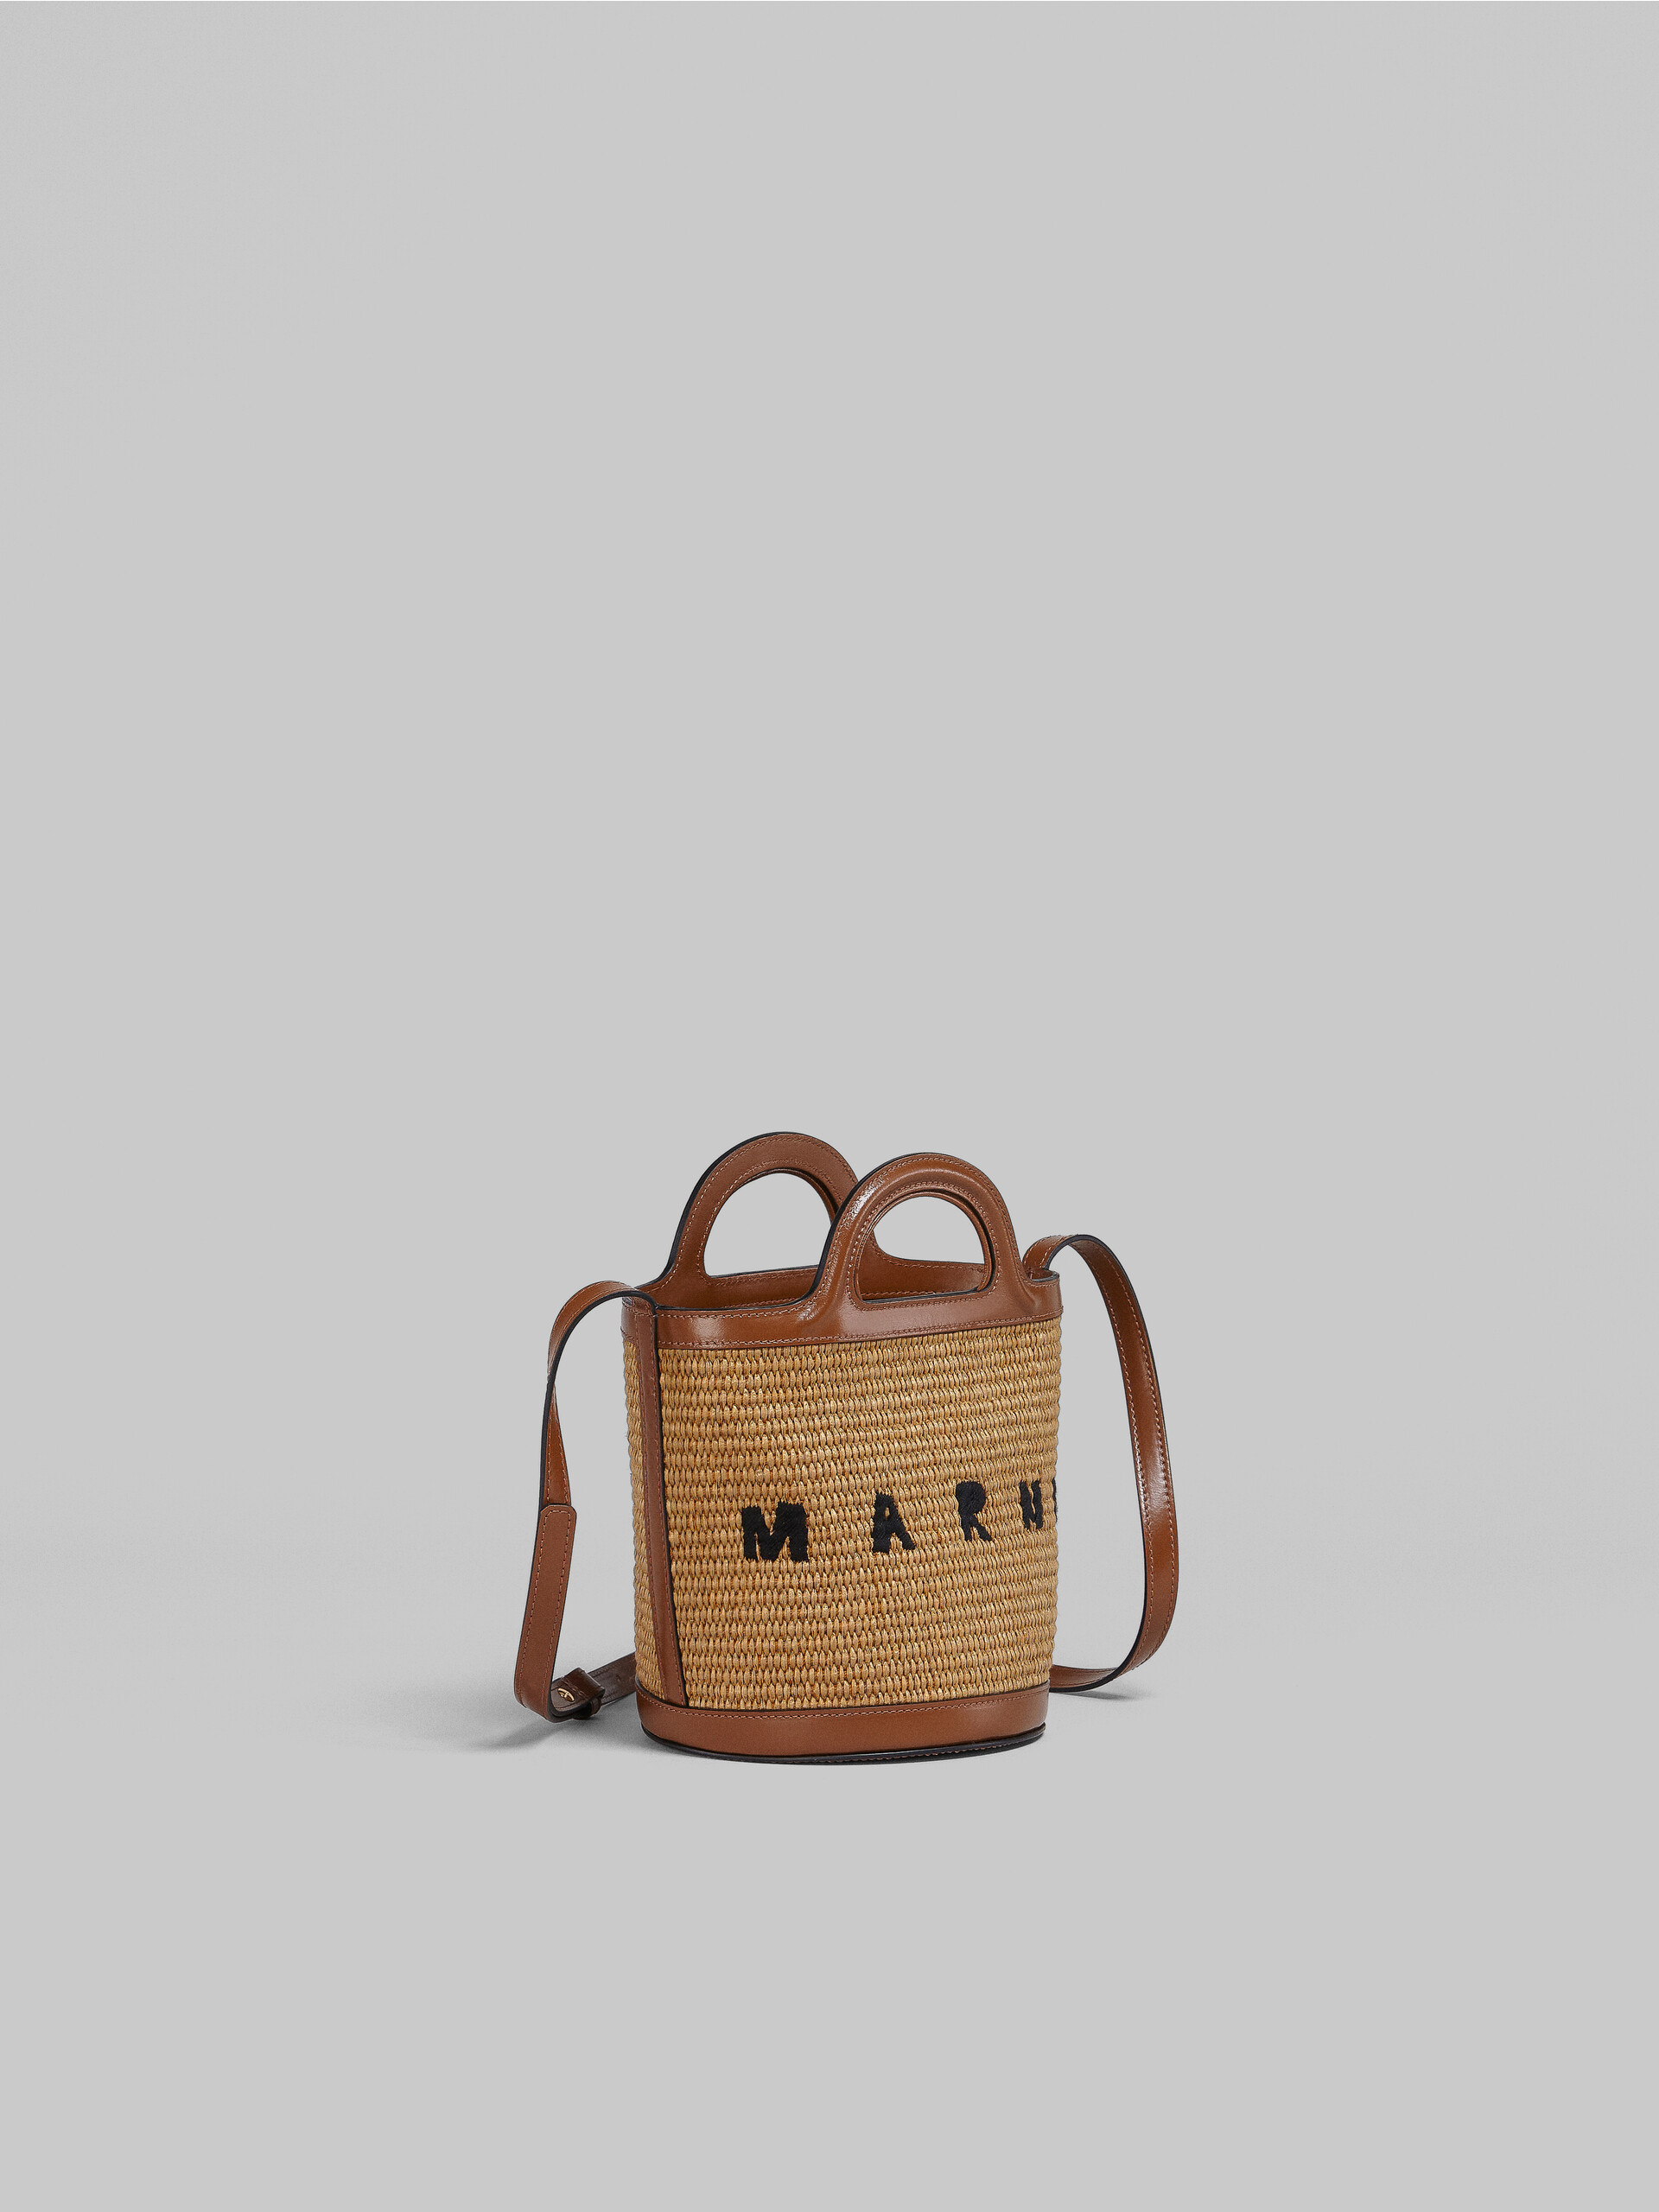 Tropicalia Small Bucket Bag in brown leather and raffia - Shoulder Bags - Image 6